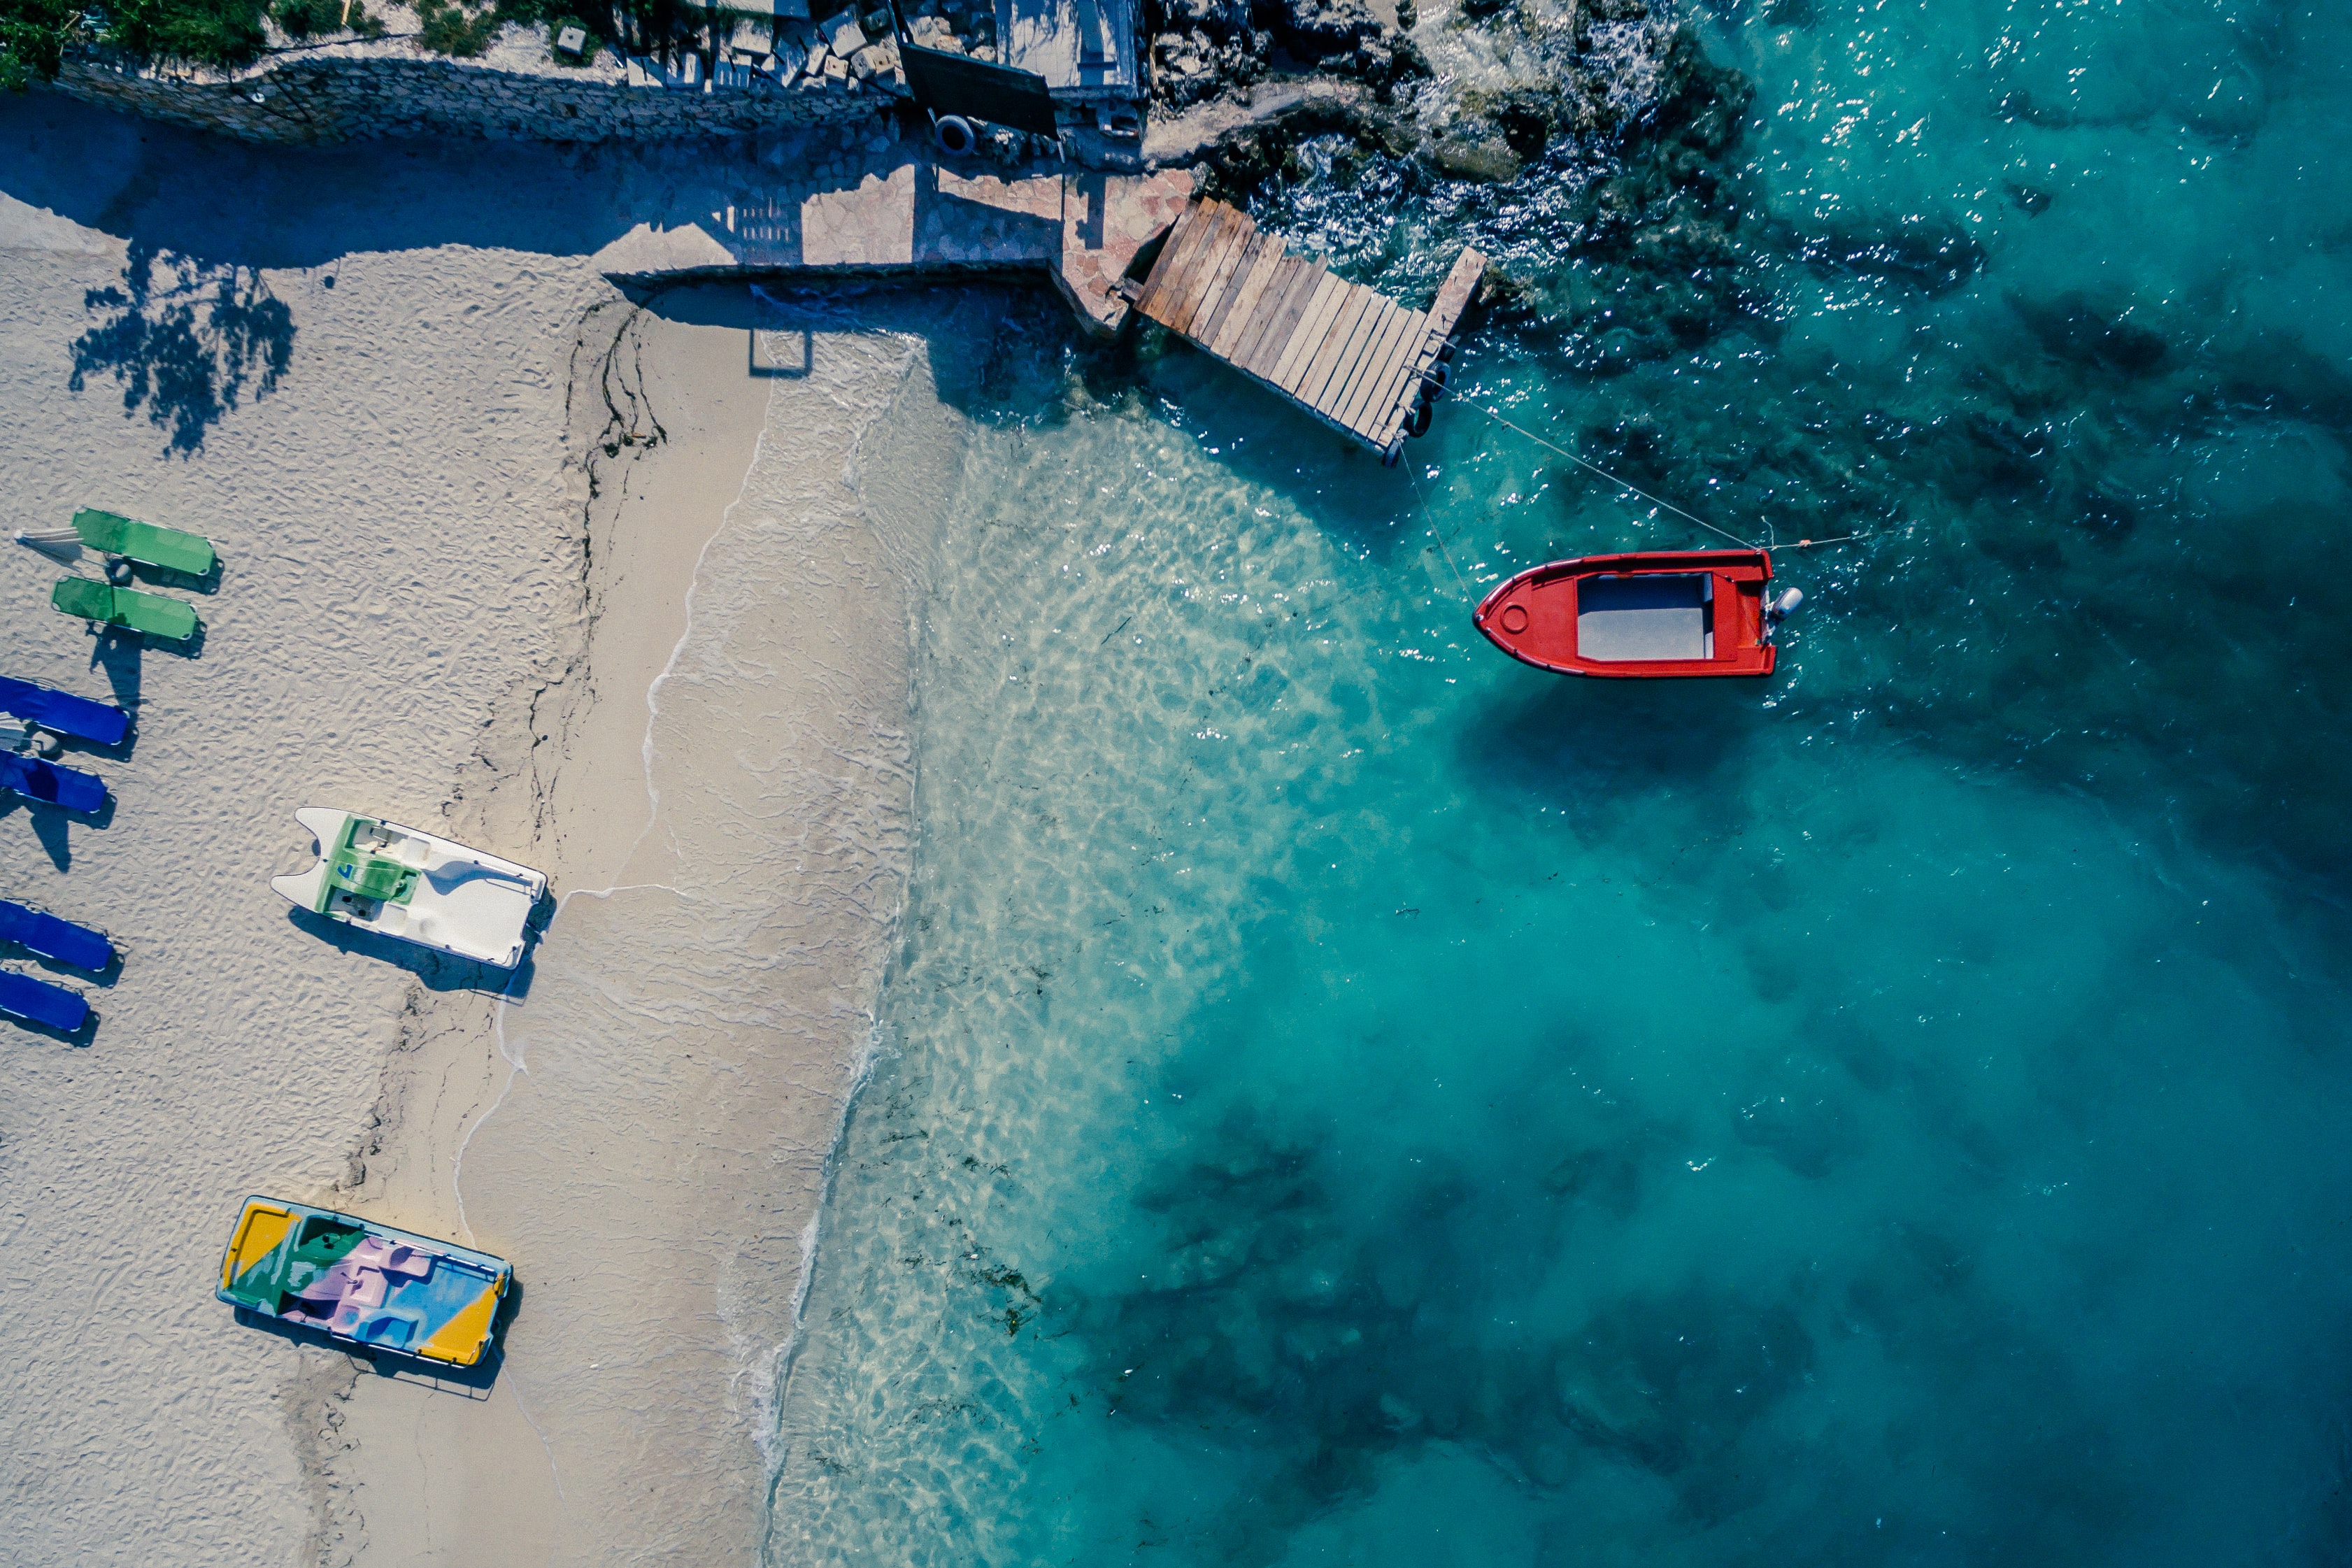 Looking down on a beach with blue water and a red boat